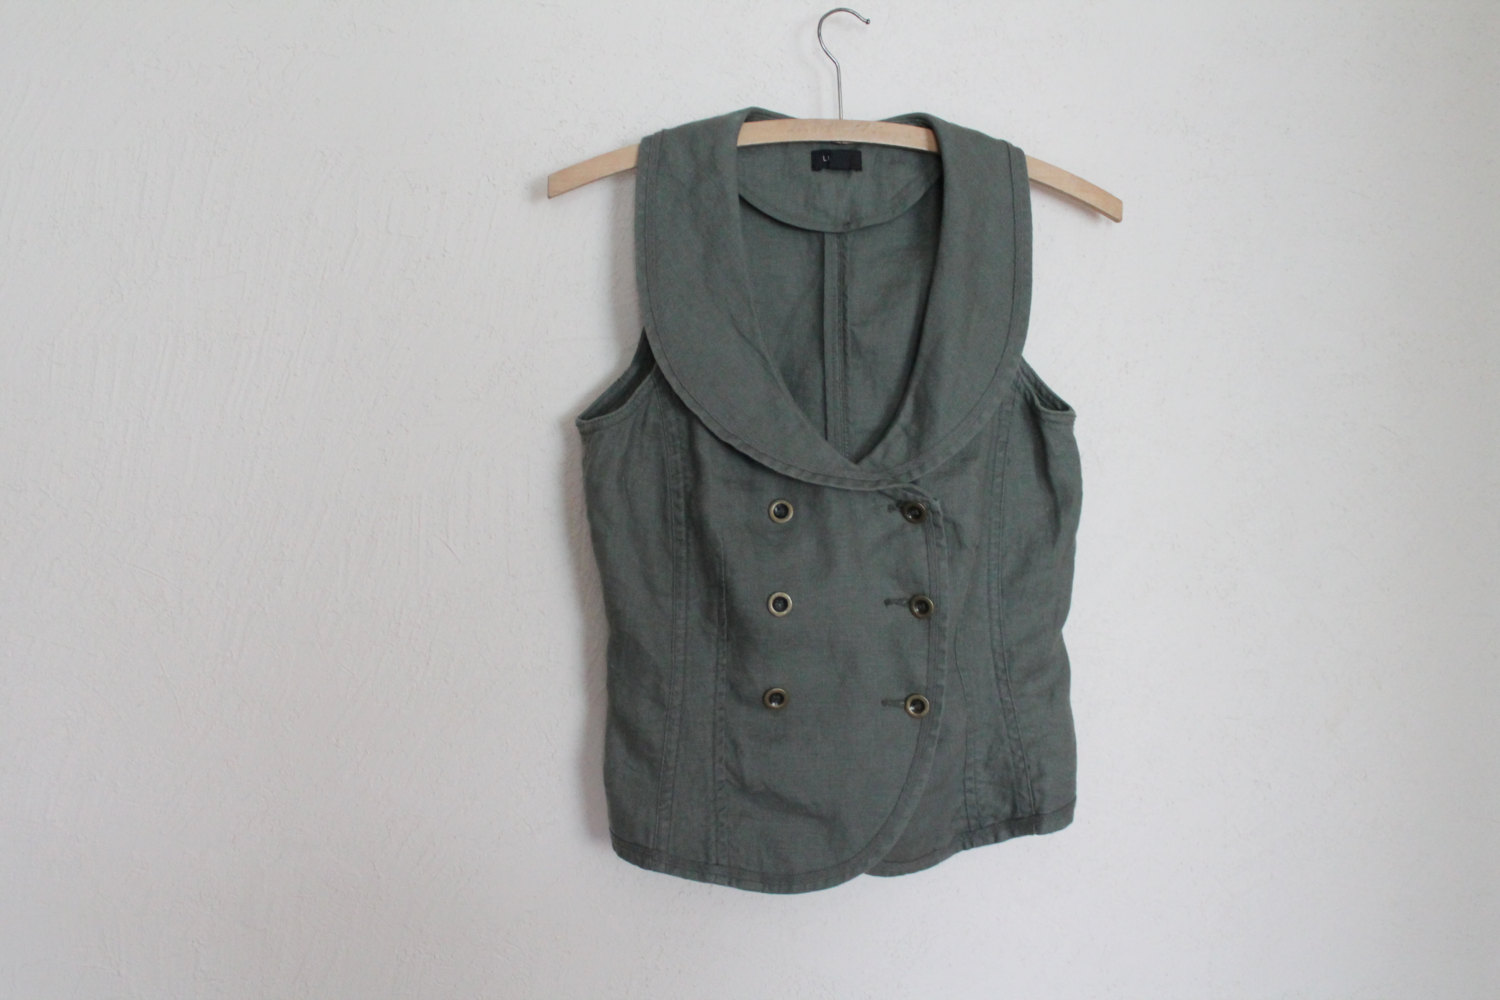 Olive Green Khaki Linen Vest Women Waistcoat Suit Collar Sleeveless Jacket Fitted Traditional Formal Classic Romantic Small Size steampunk buy now online